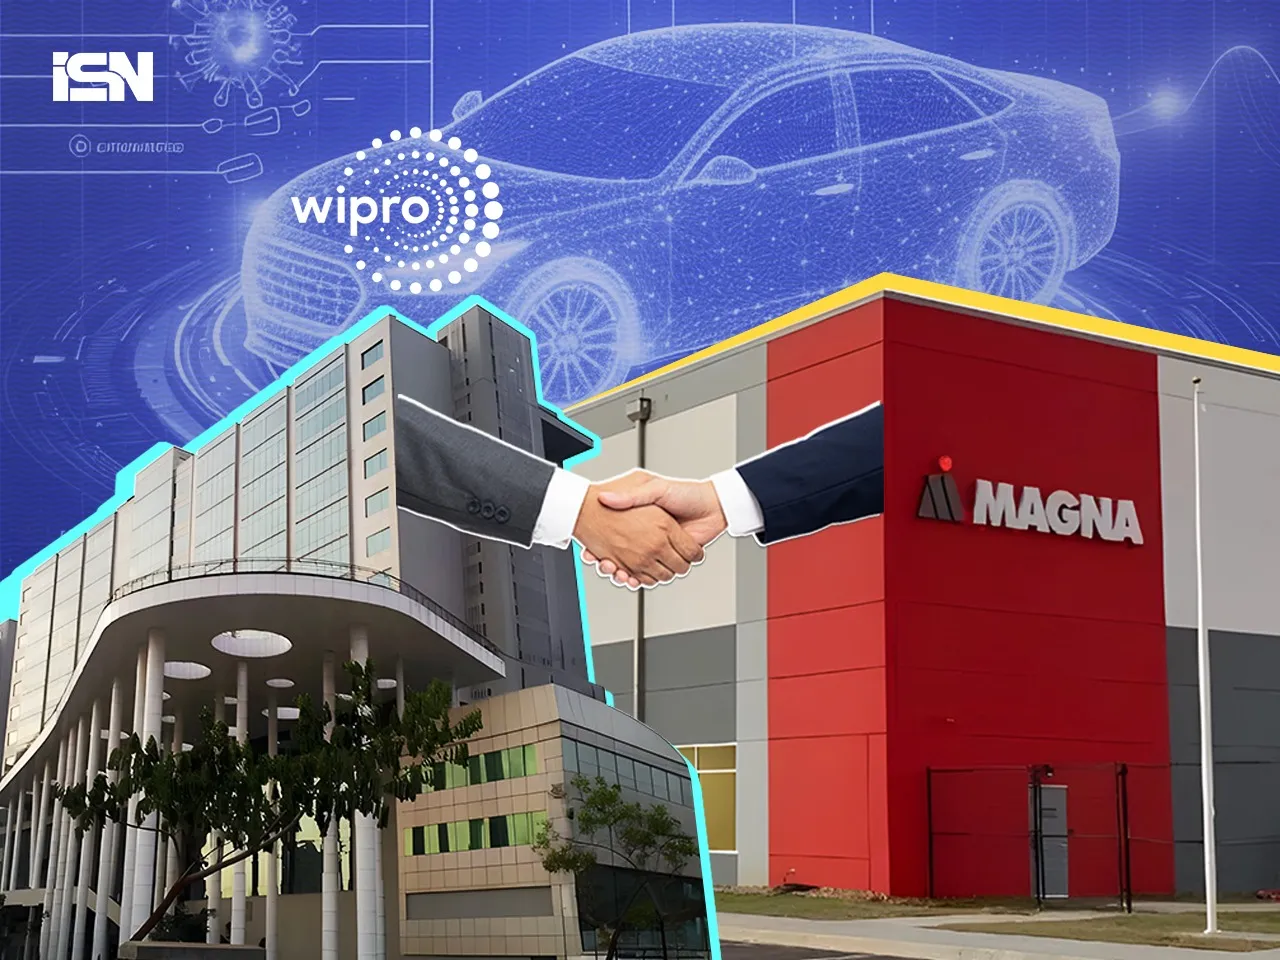 General Motors, Magna, and Wipro to launch SDVerse